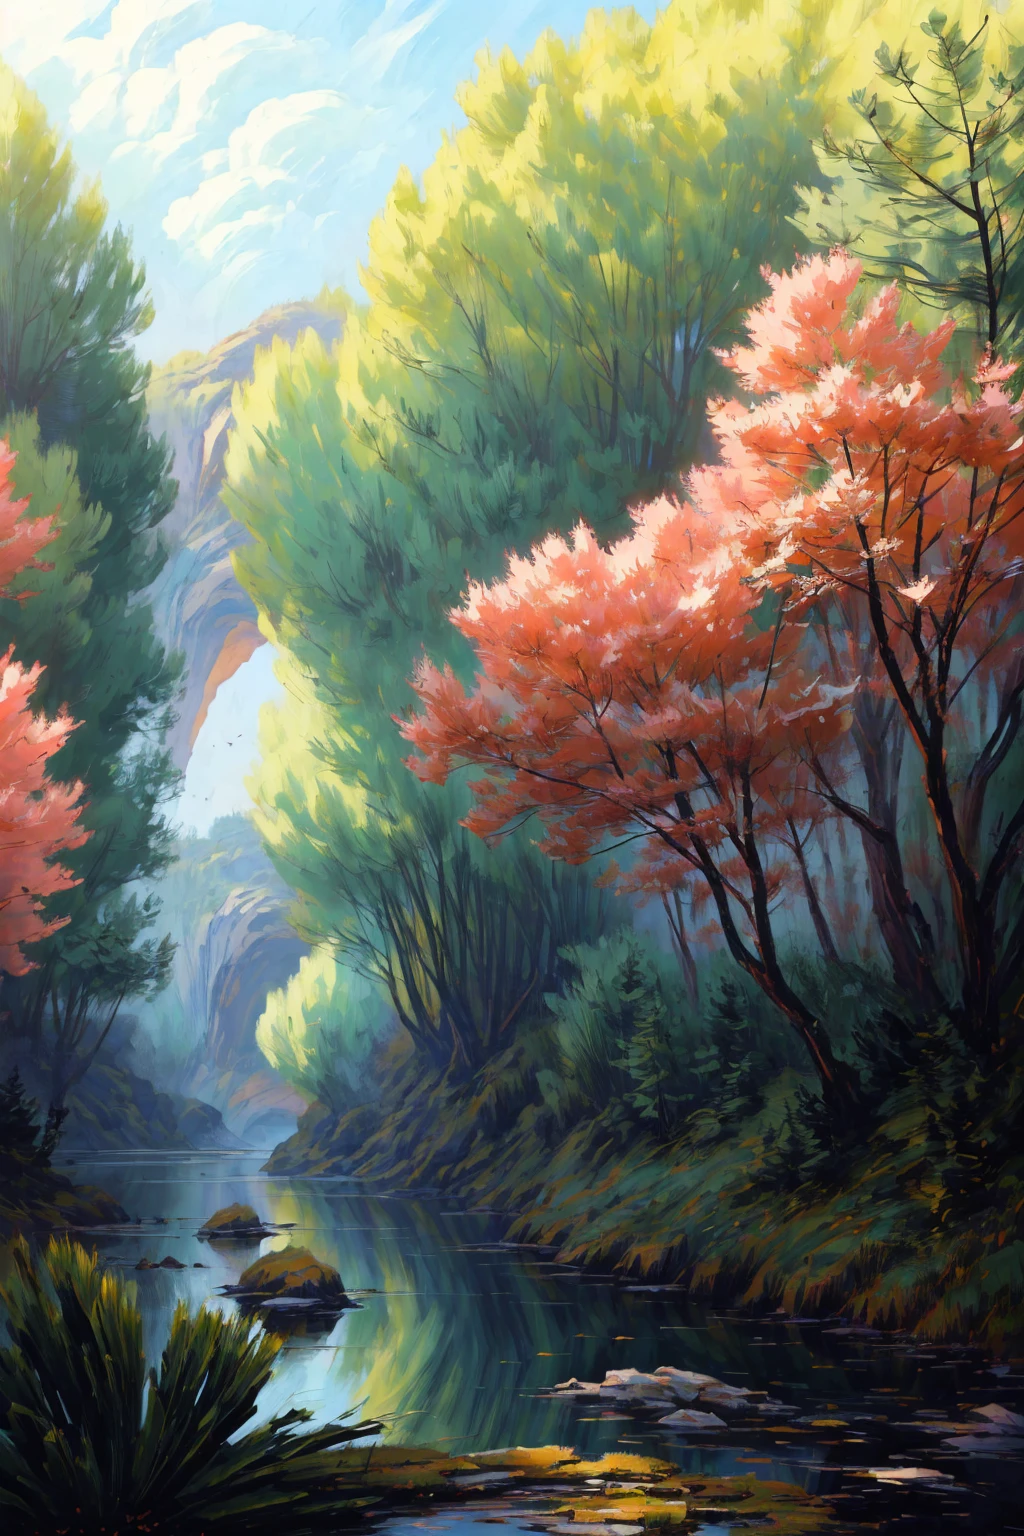 (best quality,4k,8k,highres,masterpiece:1.2),ultra-detailed,(realistic,photorealistic,photo-realistic:1.37),oil painting,colorful scenery,impressionistic,serene garden,natural beauty,lush greenery,rippling water,soft sunlight,subtle brushstrokes,ethereal atmosphere,reflection on water,harmonious composition,mesmerizing details,dream-like,tranquil setting,nature's tranquility,soft pastel colors,impressionistic landscape,painterly strokes,impression of light and movement,peaceful ambiance,serene and calm,delicate flora and fauna,picturesque scenery,painter's vision,quiet corner,nostalgic beauty,sunlit garden,pathway leading to infinity,verdant landscape,splashes of vibrant colors,playful interplay of light and shadow,graceful brushwork,blurring the boundaries between reality and dreams,inviting escape into nature's embrace